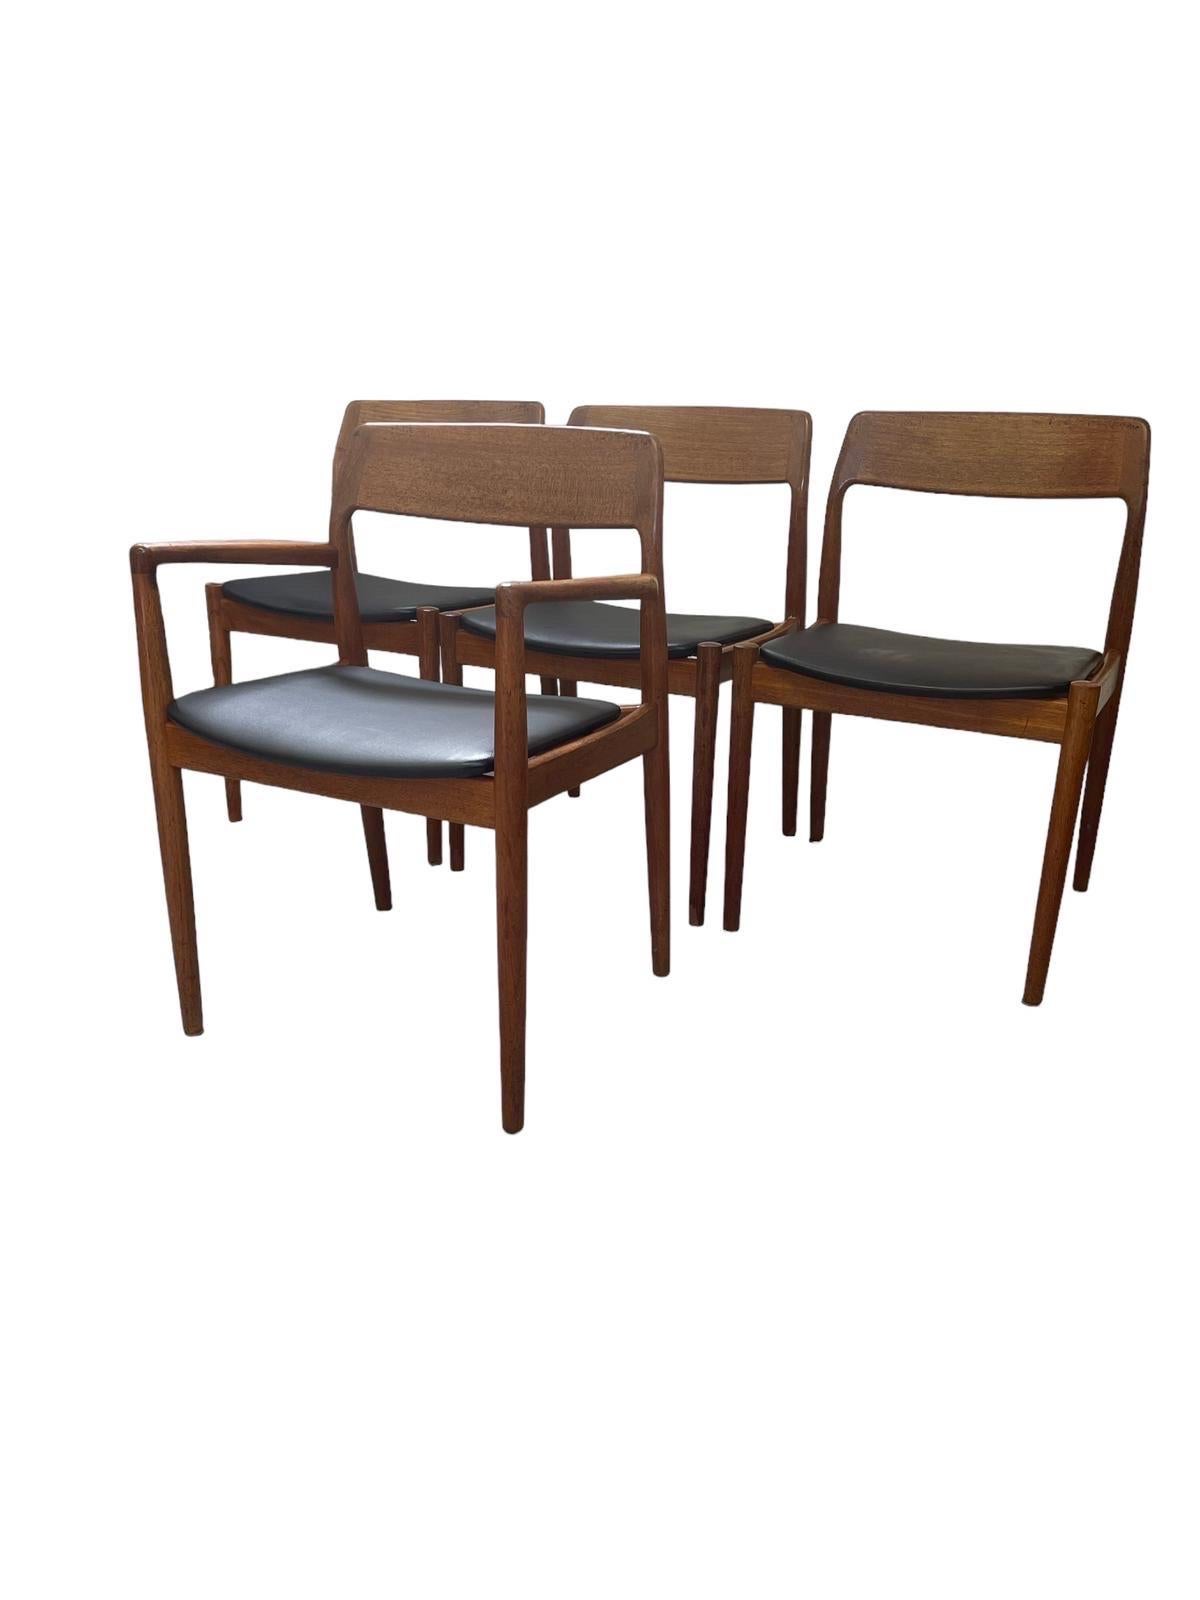 This Set Contains 1 Captain Chair and 3 Side Chairs,Possibly Teak. Chairs have been Professionally Reupholstered. Vintage Condition Consistent with Age as Pictured.

Dimensions. 23!W ; 20 D ; 30 H

Seat Height. 17